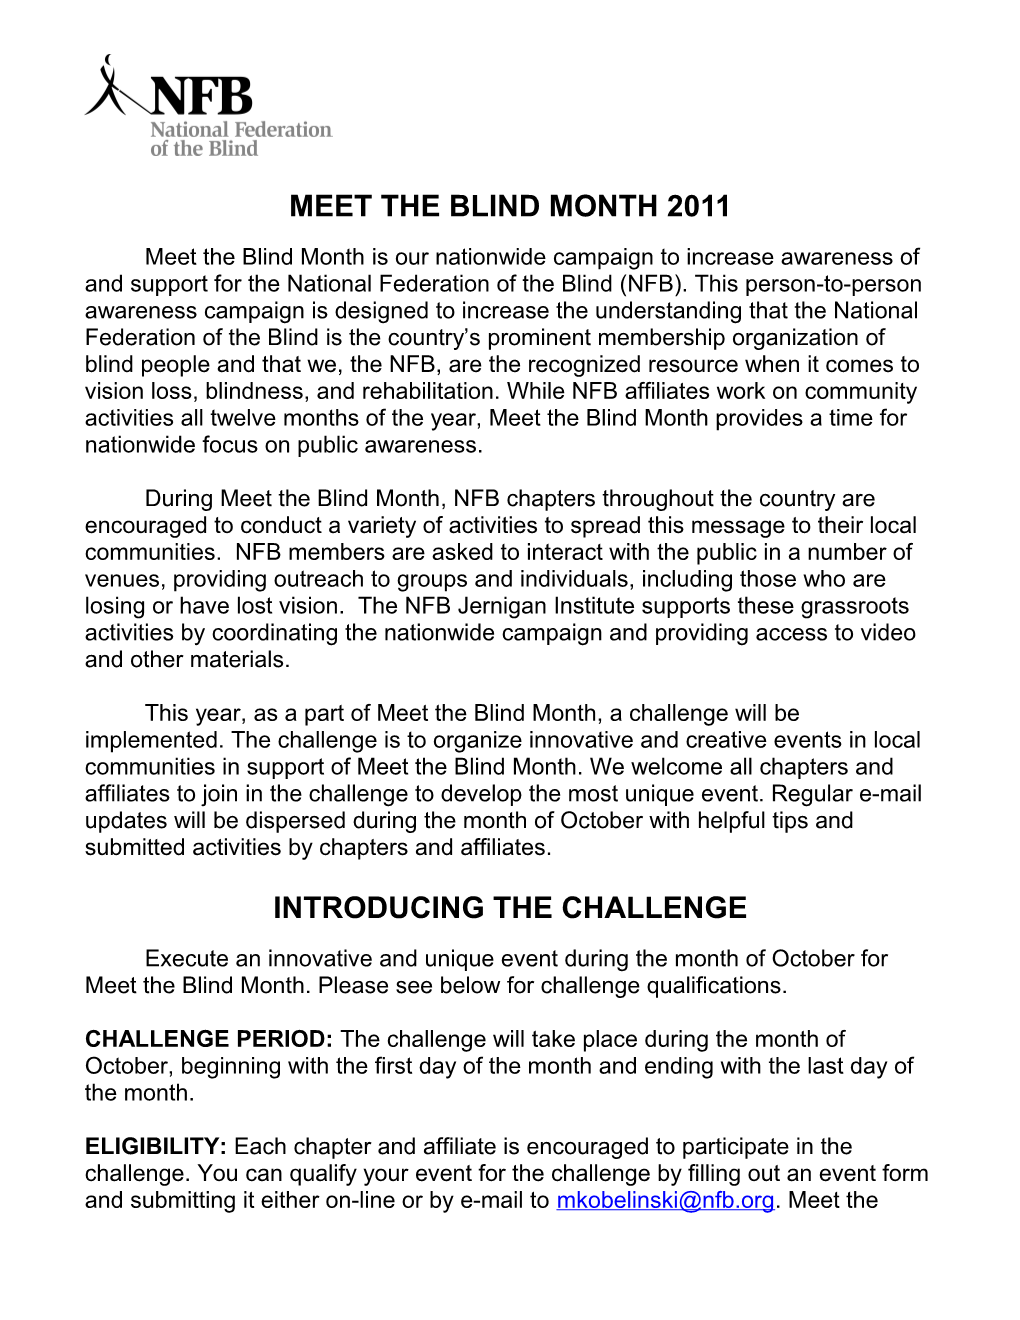 Meet the Blind Month Challenge